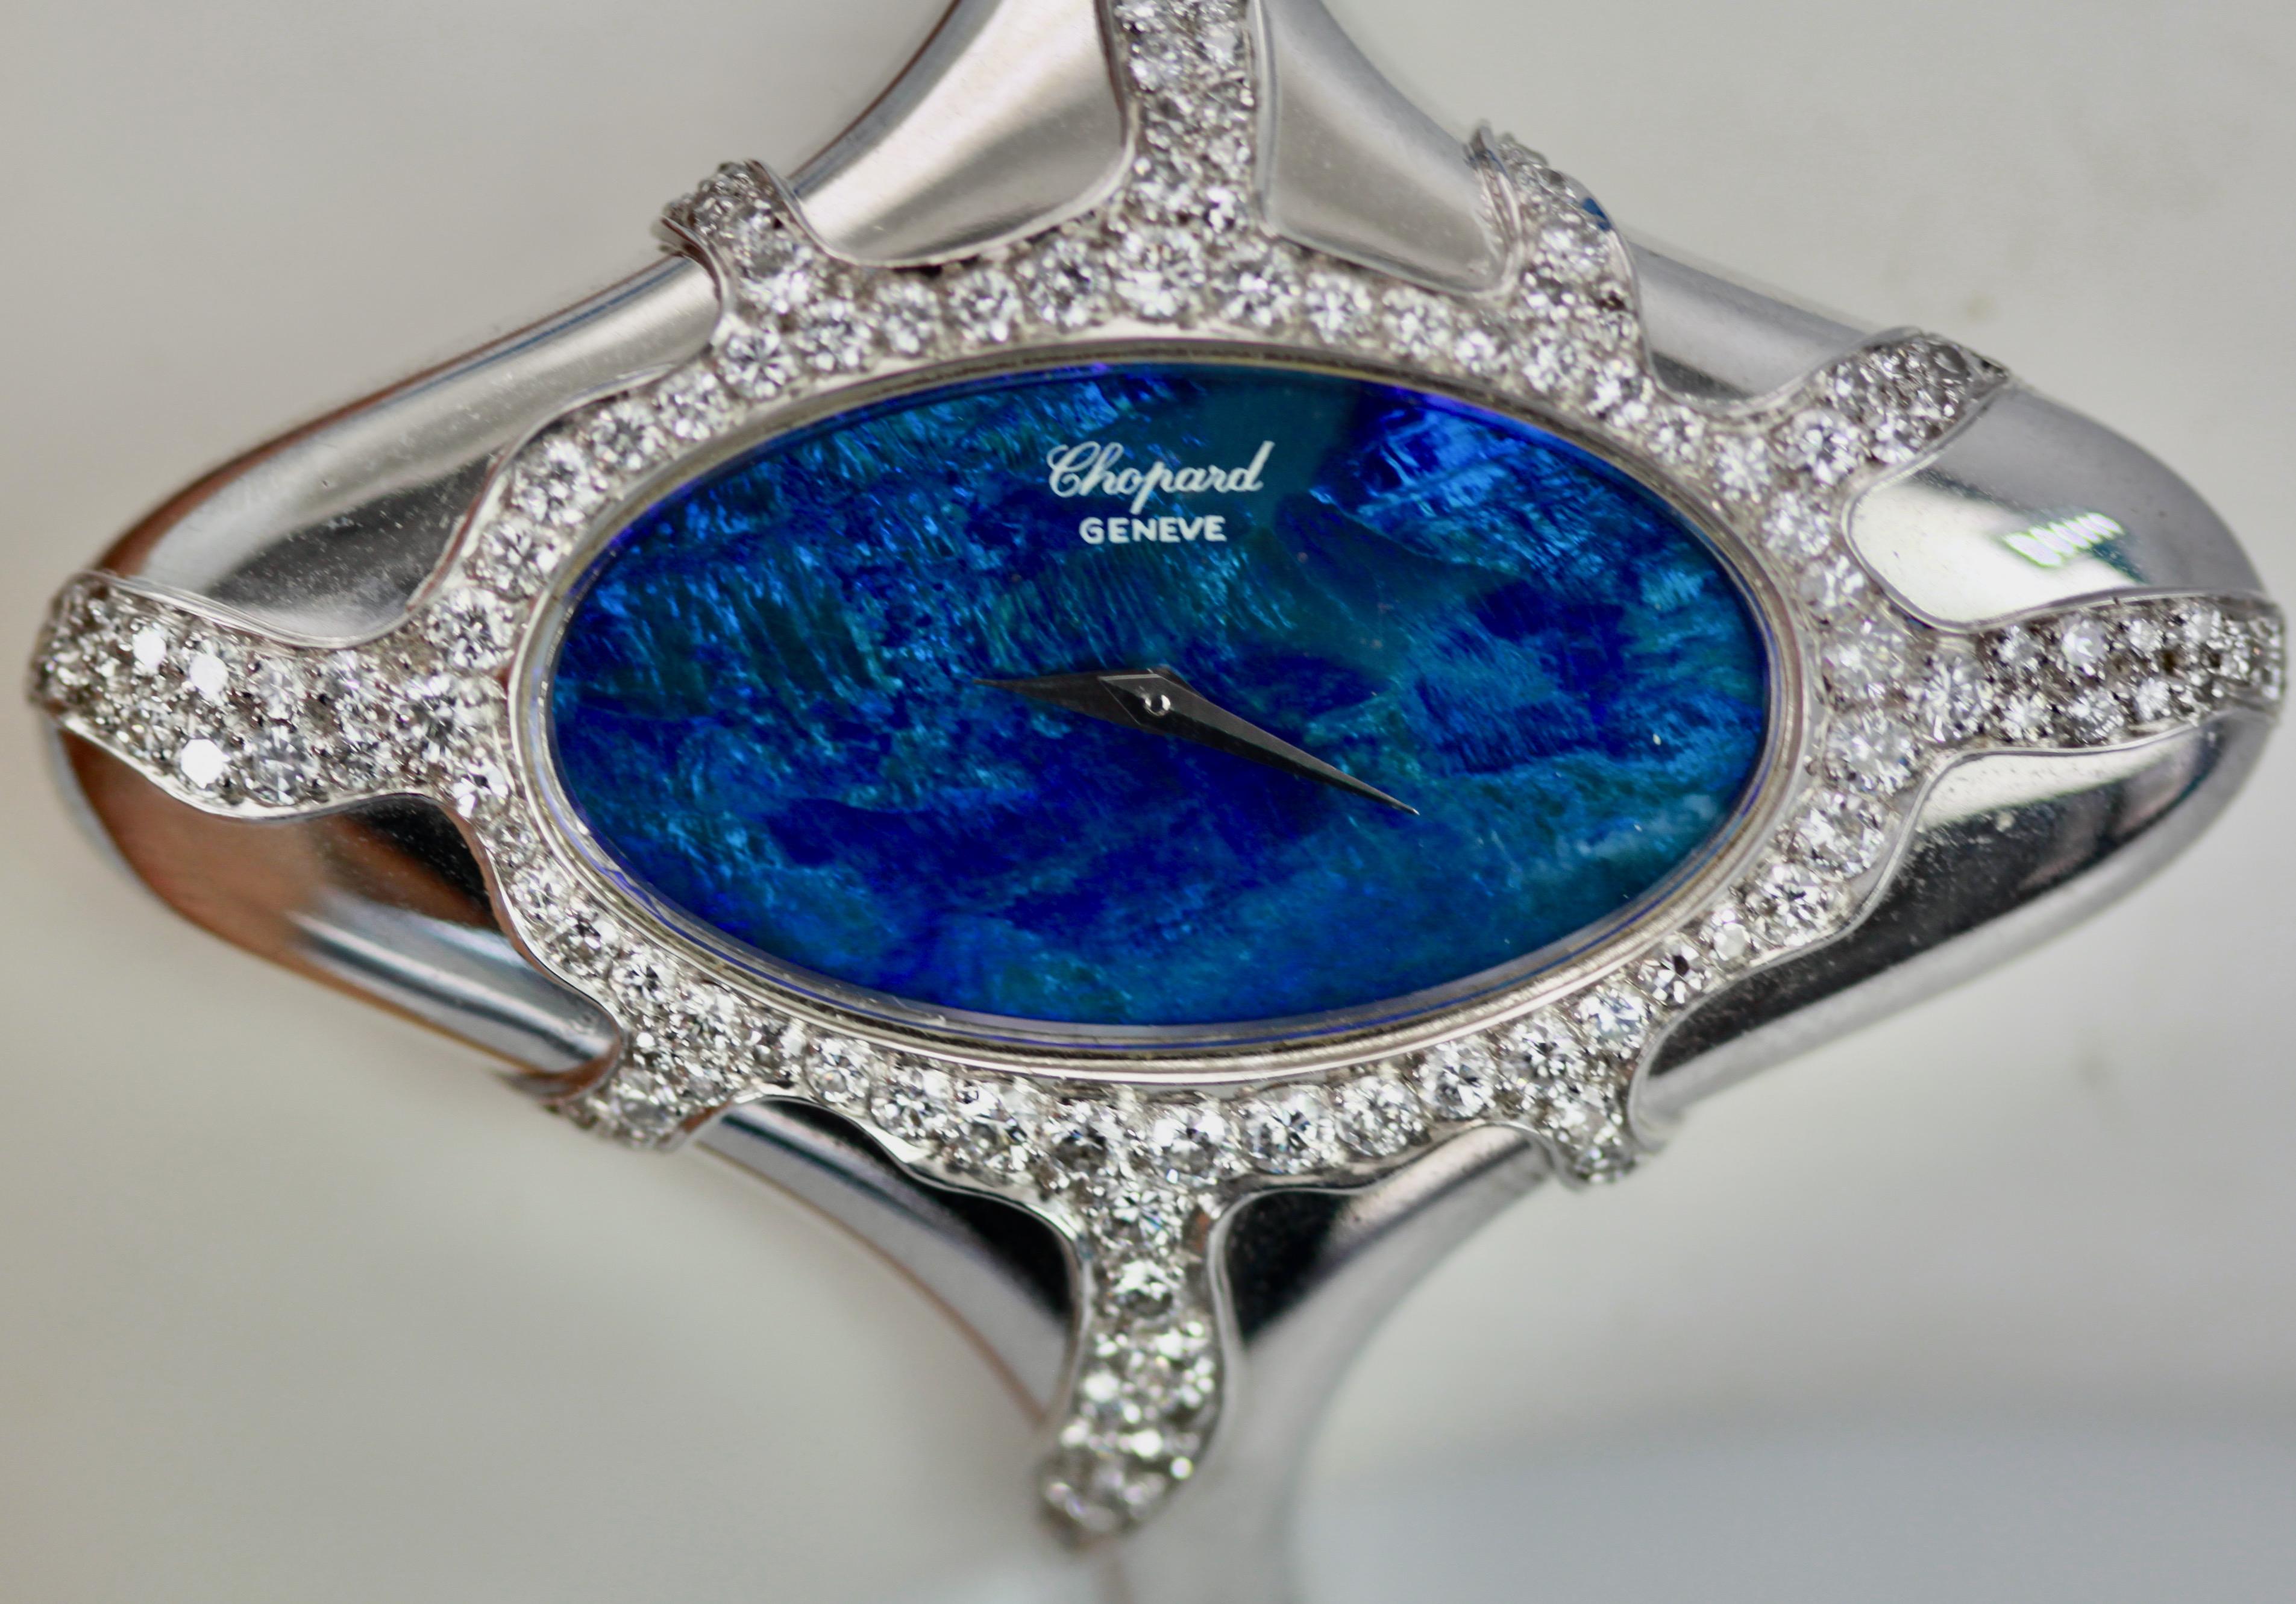 This Chopard Opal Diamond Watch is done in 18K white gold, Black Opal Face, manual wind Ladies Wristwatch.  The Opal measures 3 cm x 2 cm and is covered in Diamonds.  There are Diamonds around the face of the watch and down the sides in a starburst